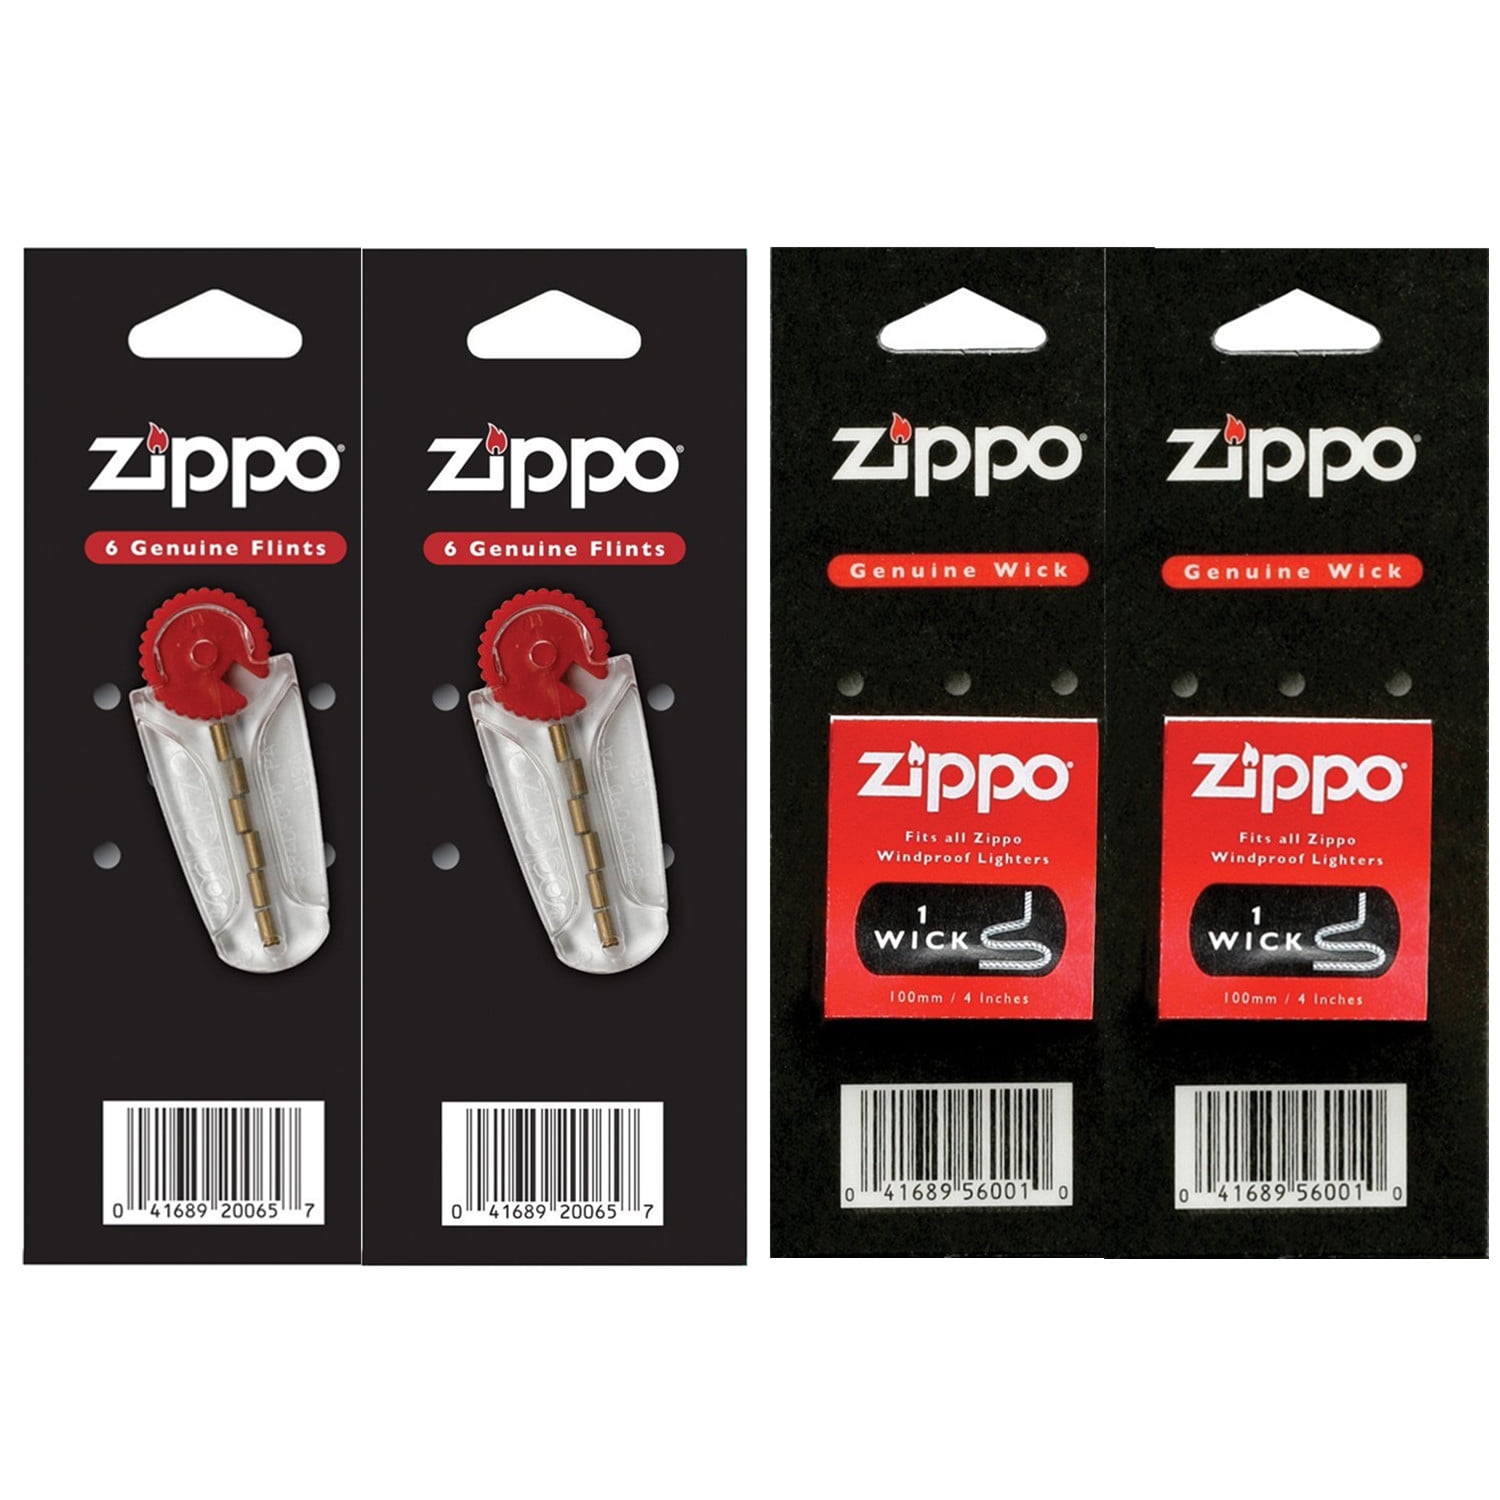 New zippo user. How often should I be changing the wicks? The